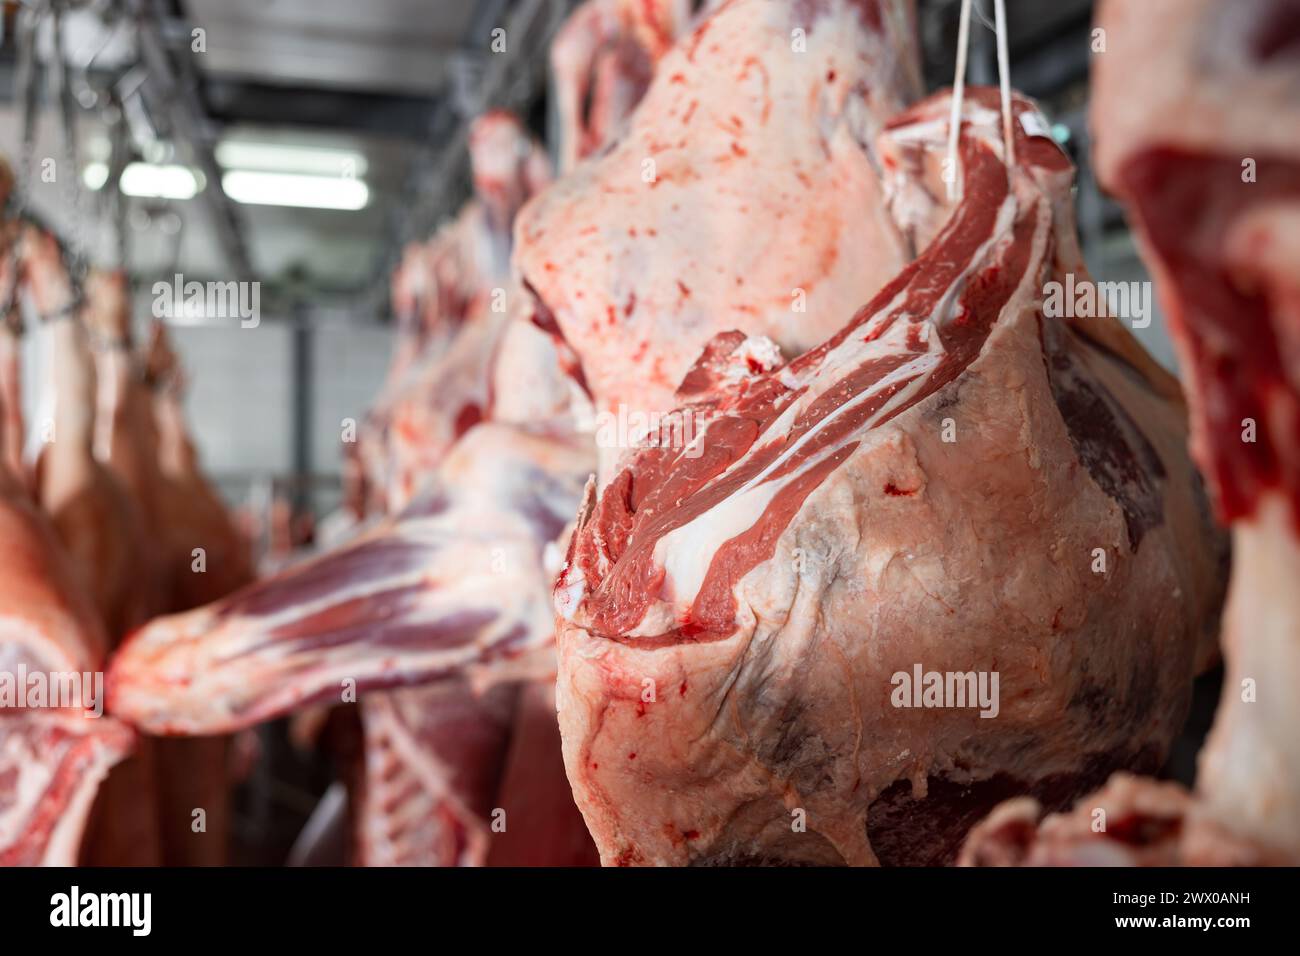 Rows of cow carcasses hanging from hooks in storage of butcher store Stock Photo